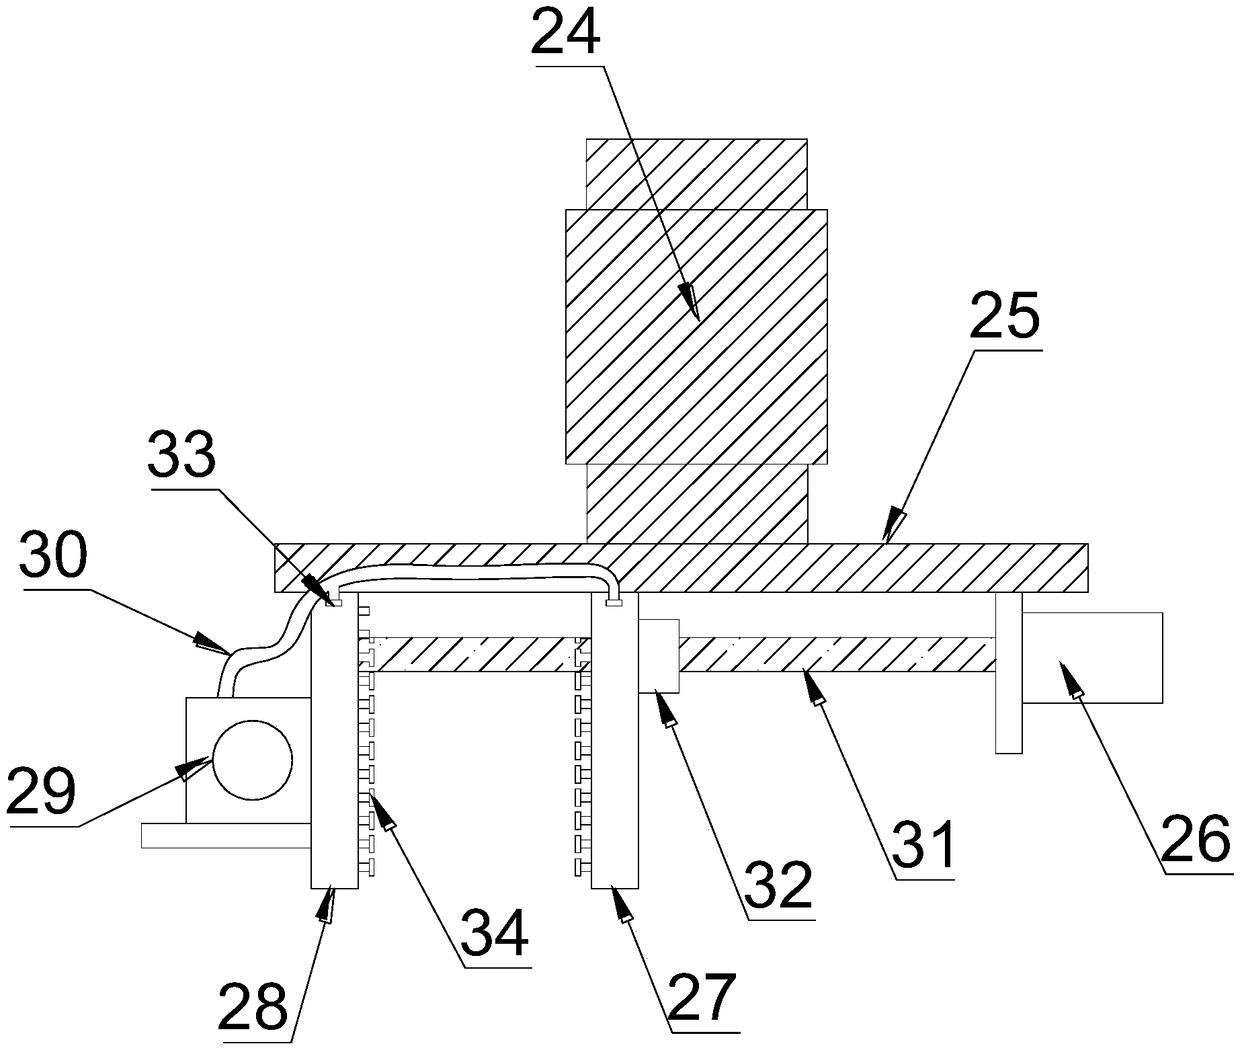 Stacking transferring mechanical device with flexible clamping gripper